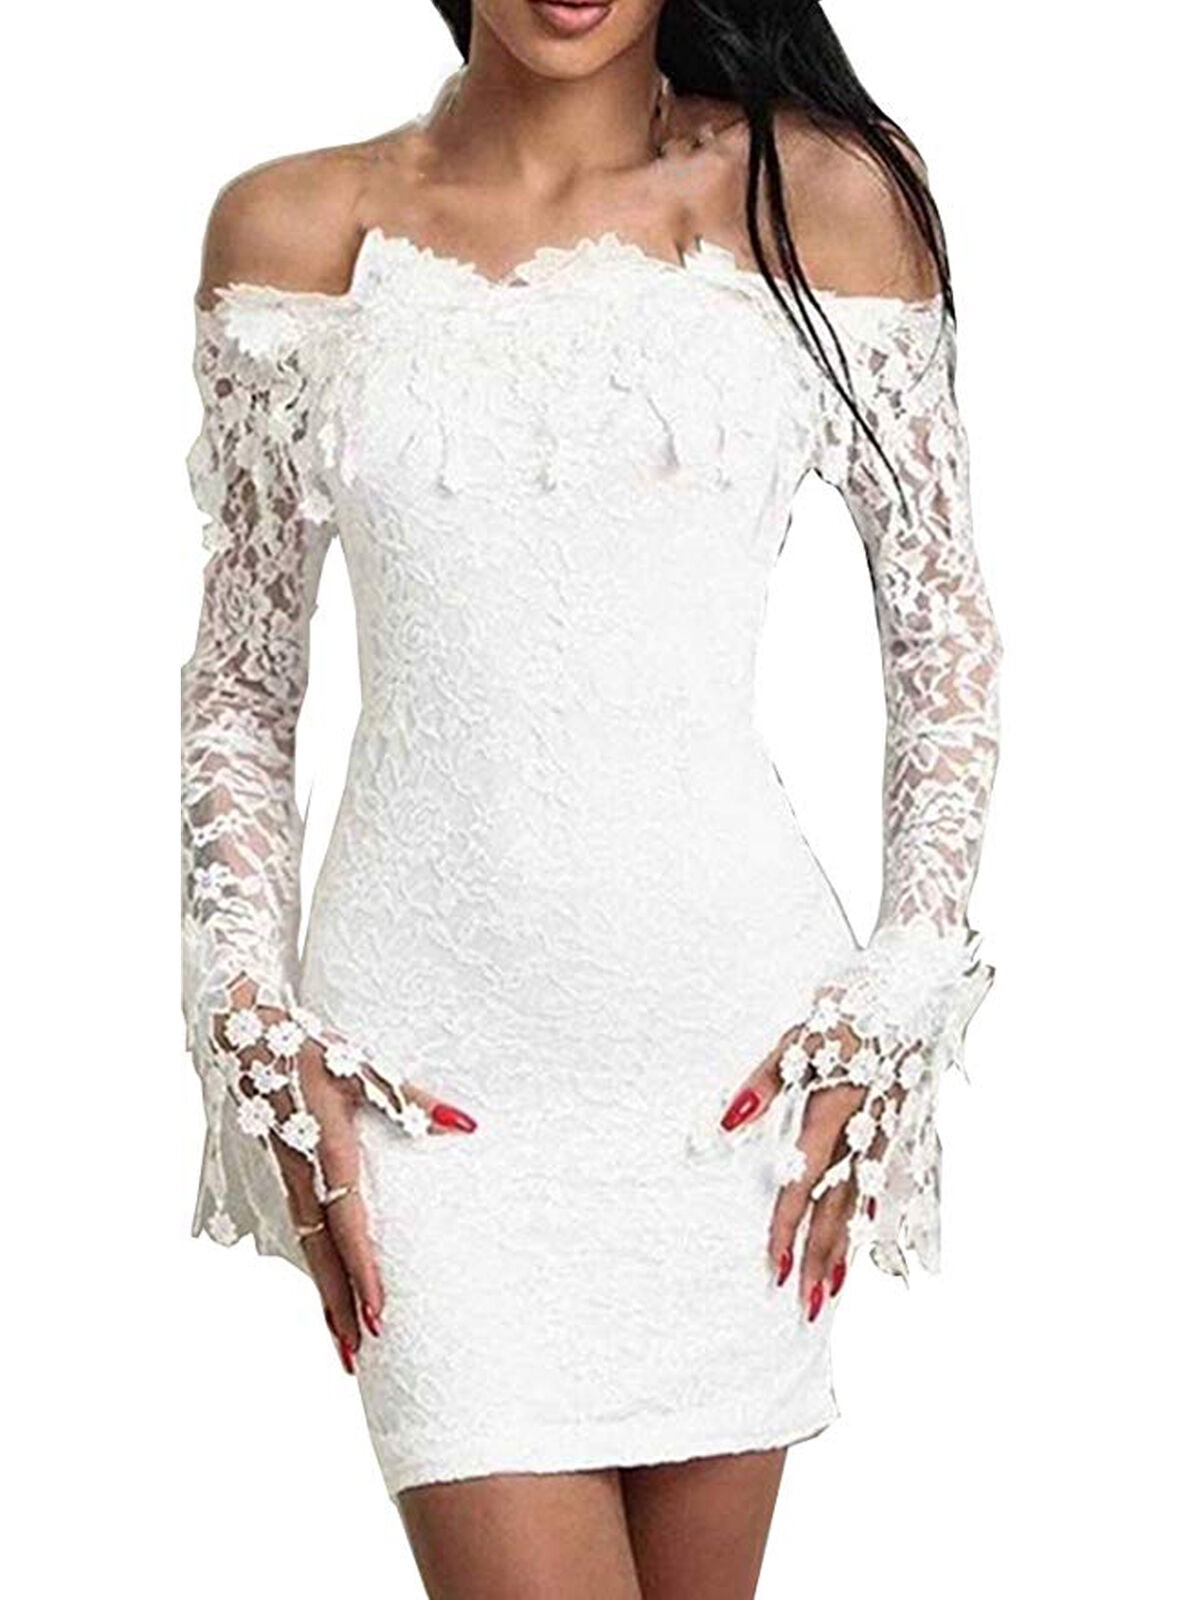 Women Floral Lace Formal Cocktail Evening Party Dress Long Sleeve Short Dress 